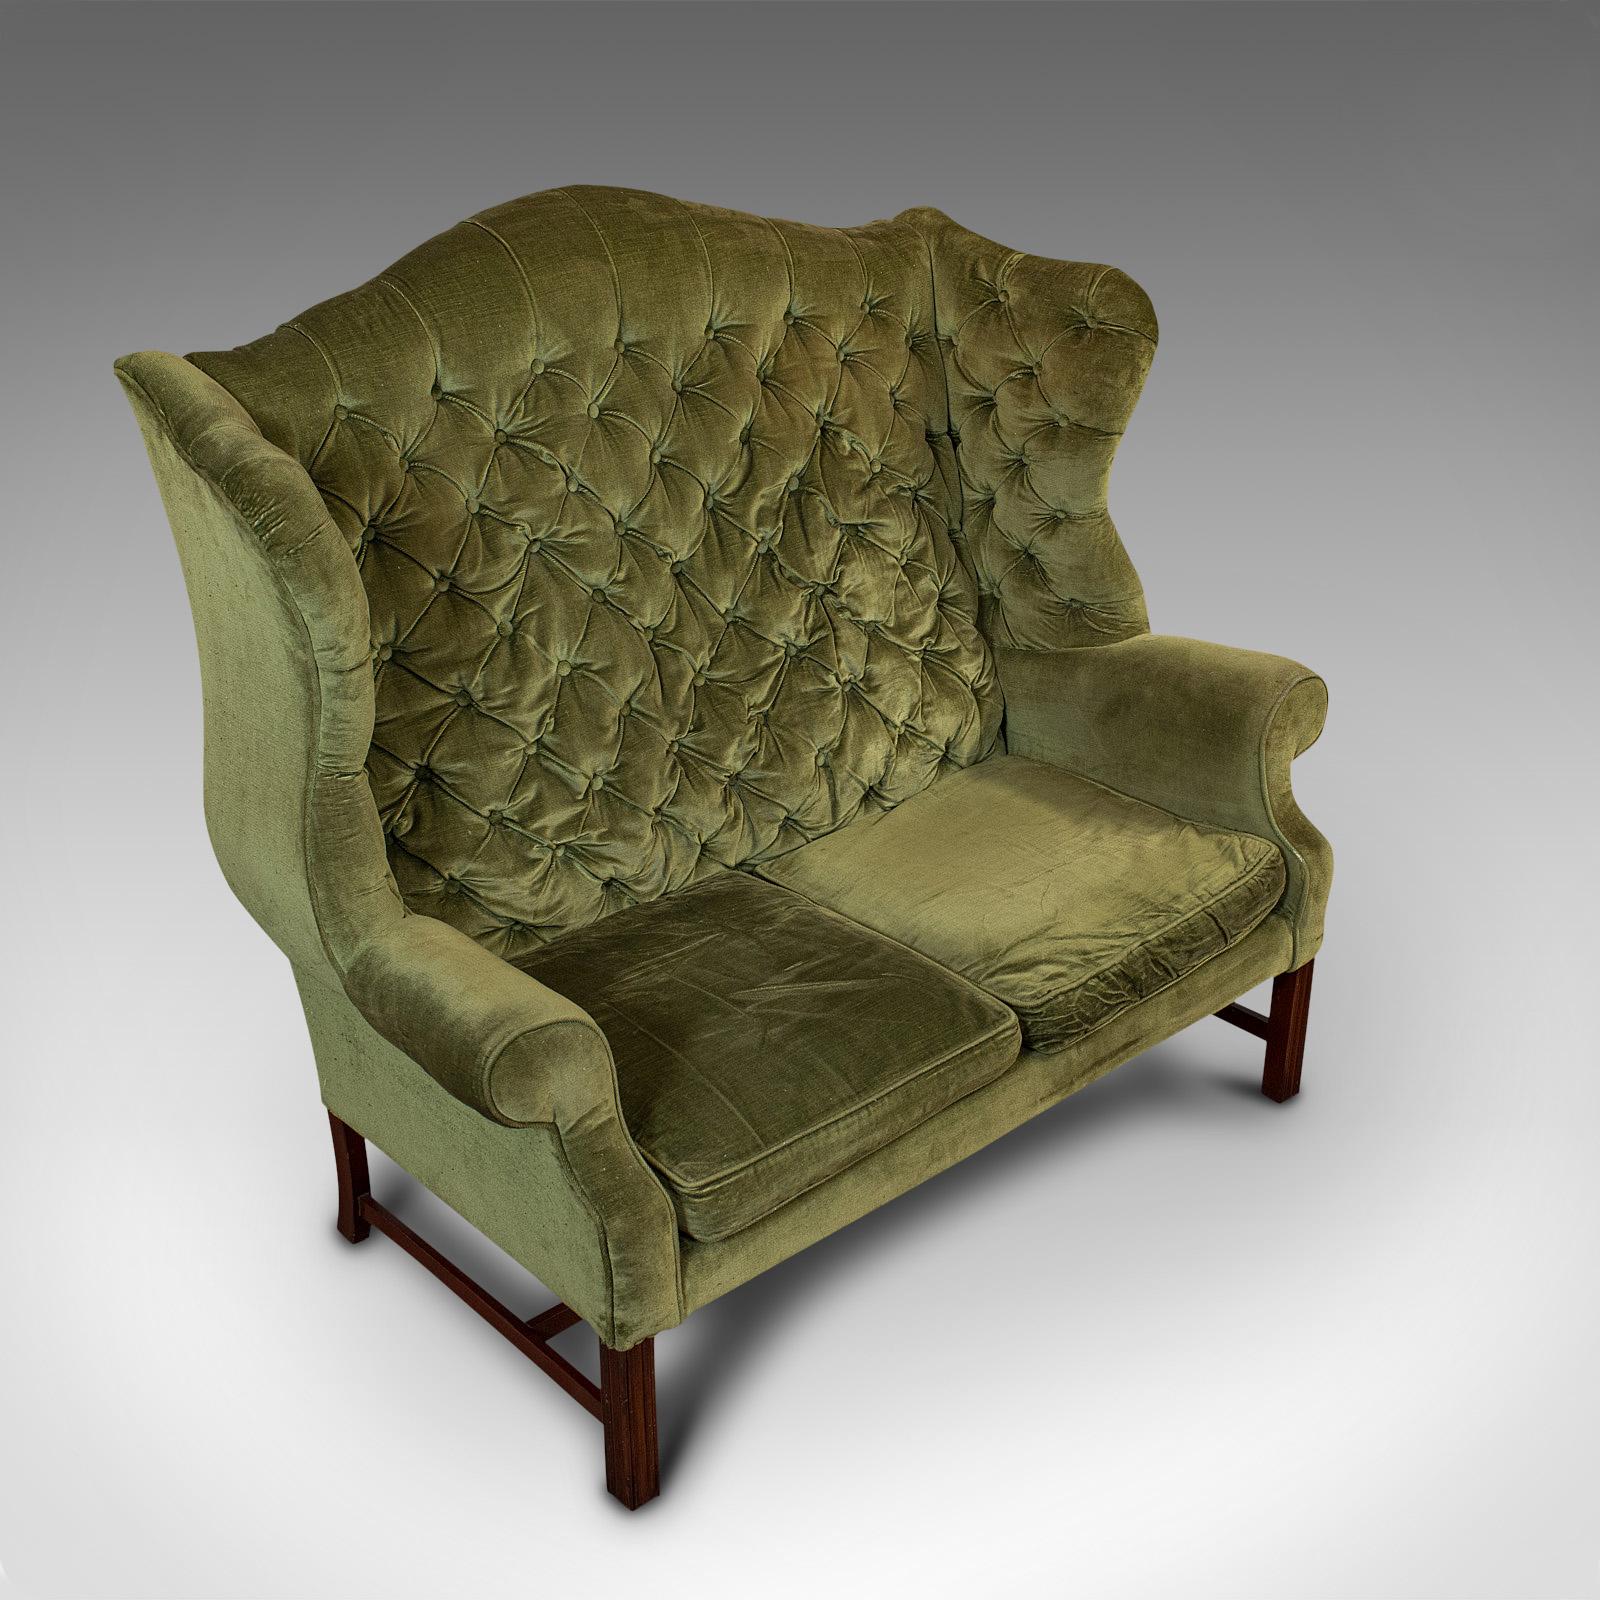 Antique High Wing-Back Settee, English, Sofa, Love Seat, Edwardian, circa 1910 In Good Condition In Hele, Devon, GB